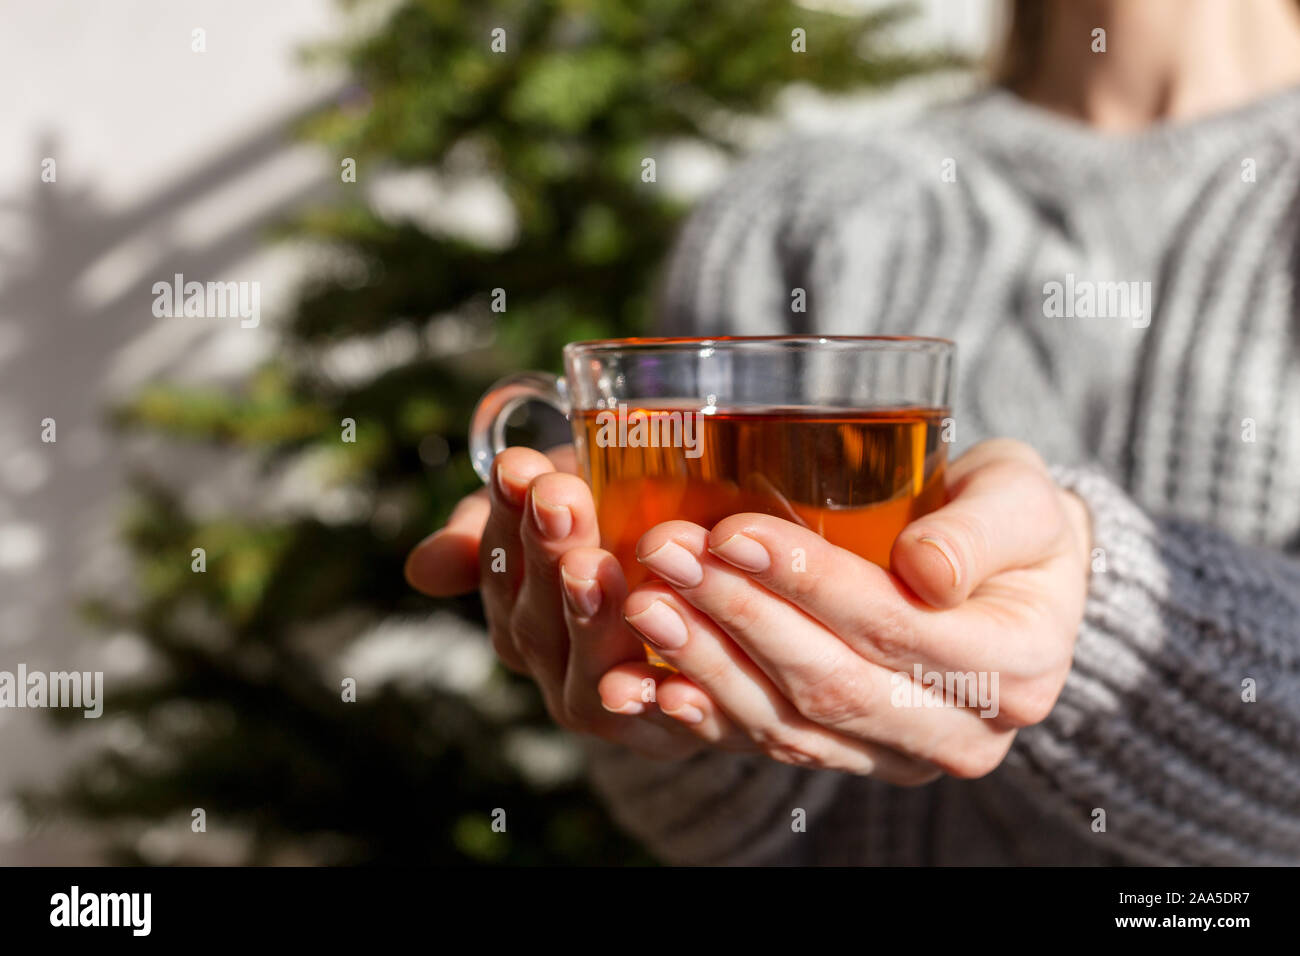 Tea cup in woman's hand with Christmas tree at background. Concept of Christmas homemade mood Stock Photo